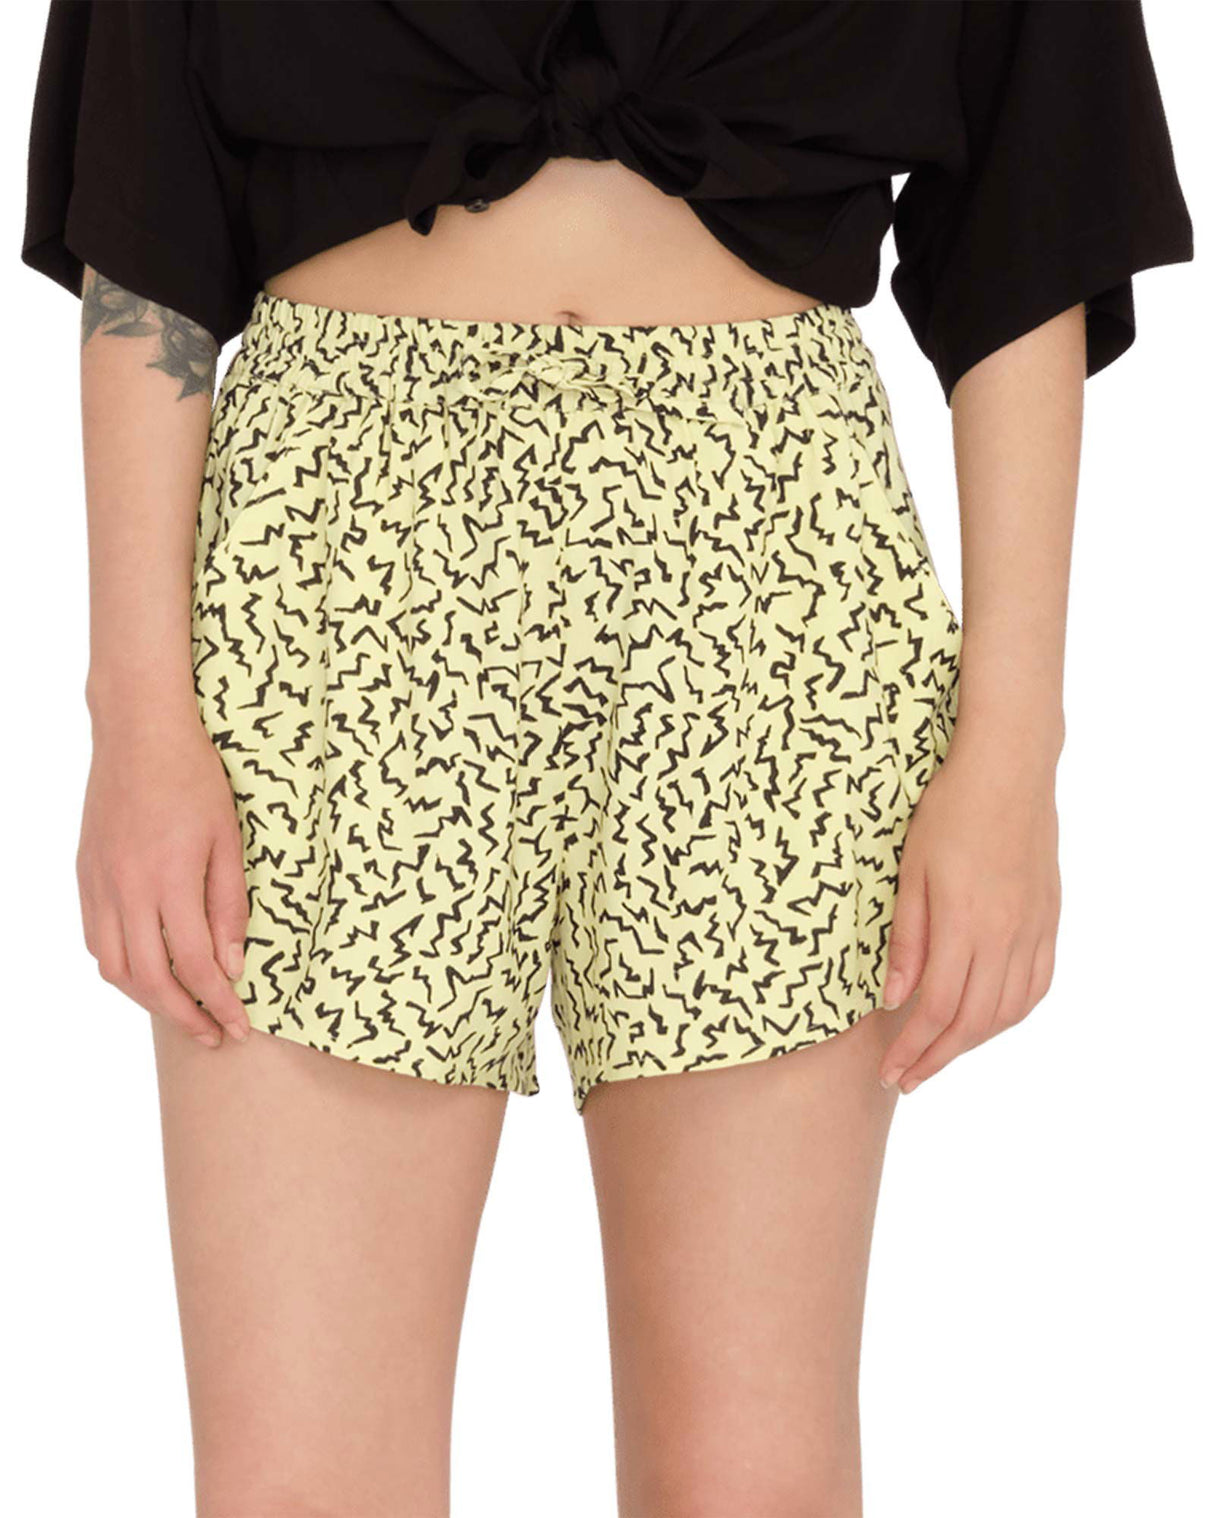 Volcom - Surfpunk Shorts | Aura Yellow -  - Married to the Sea Surf Shop - 